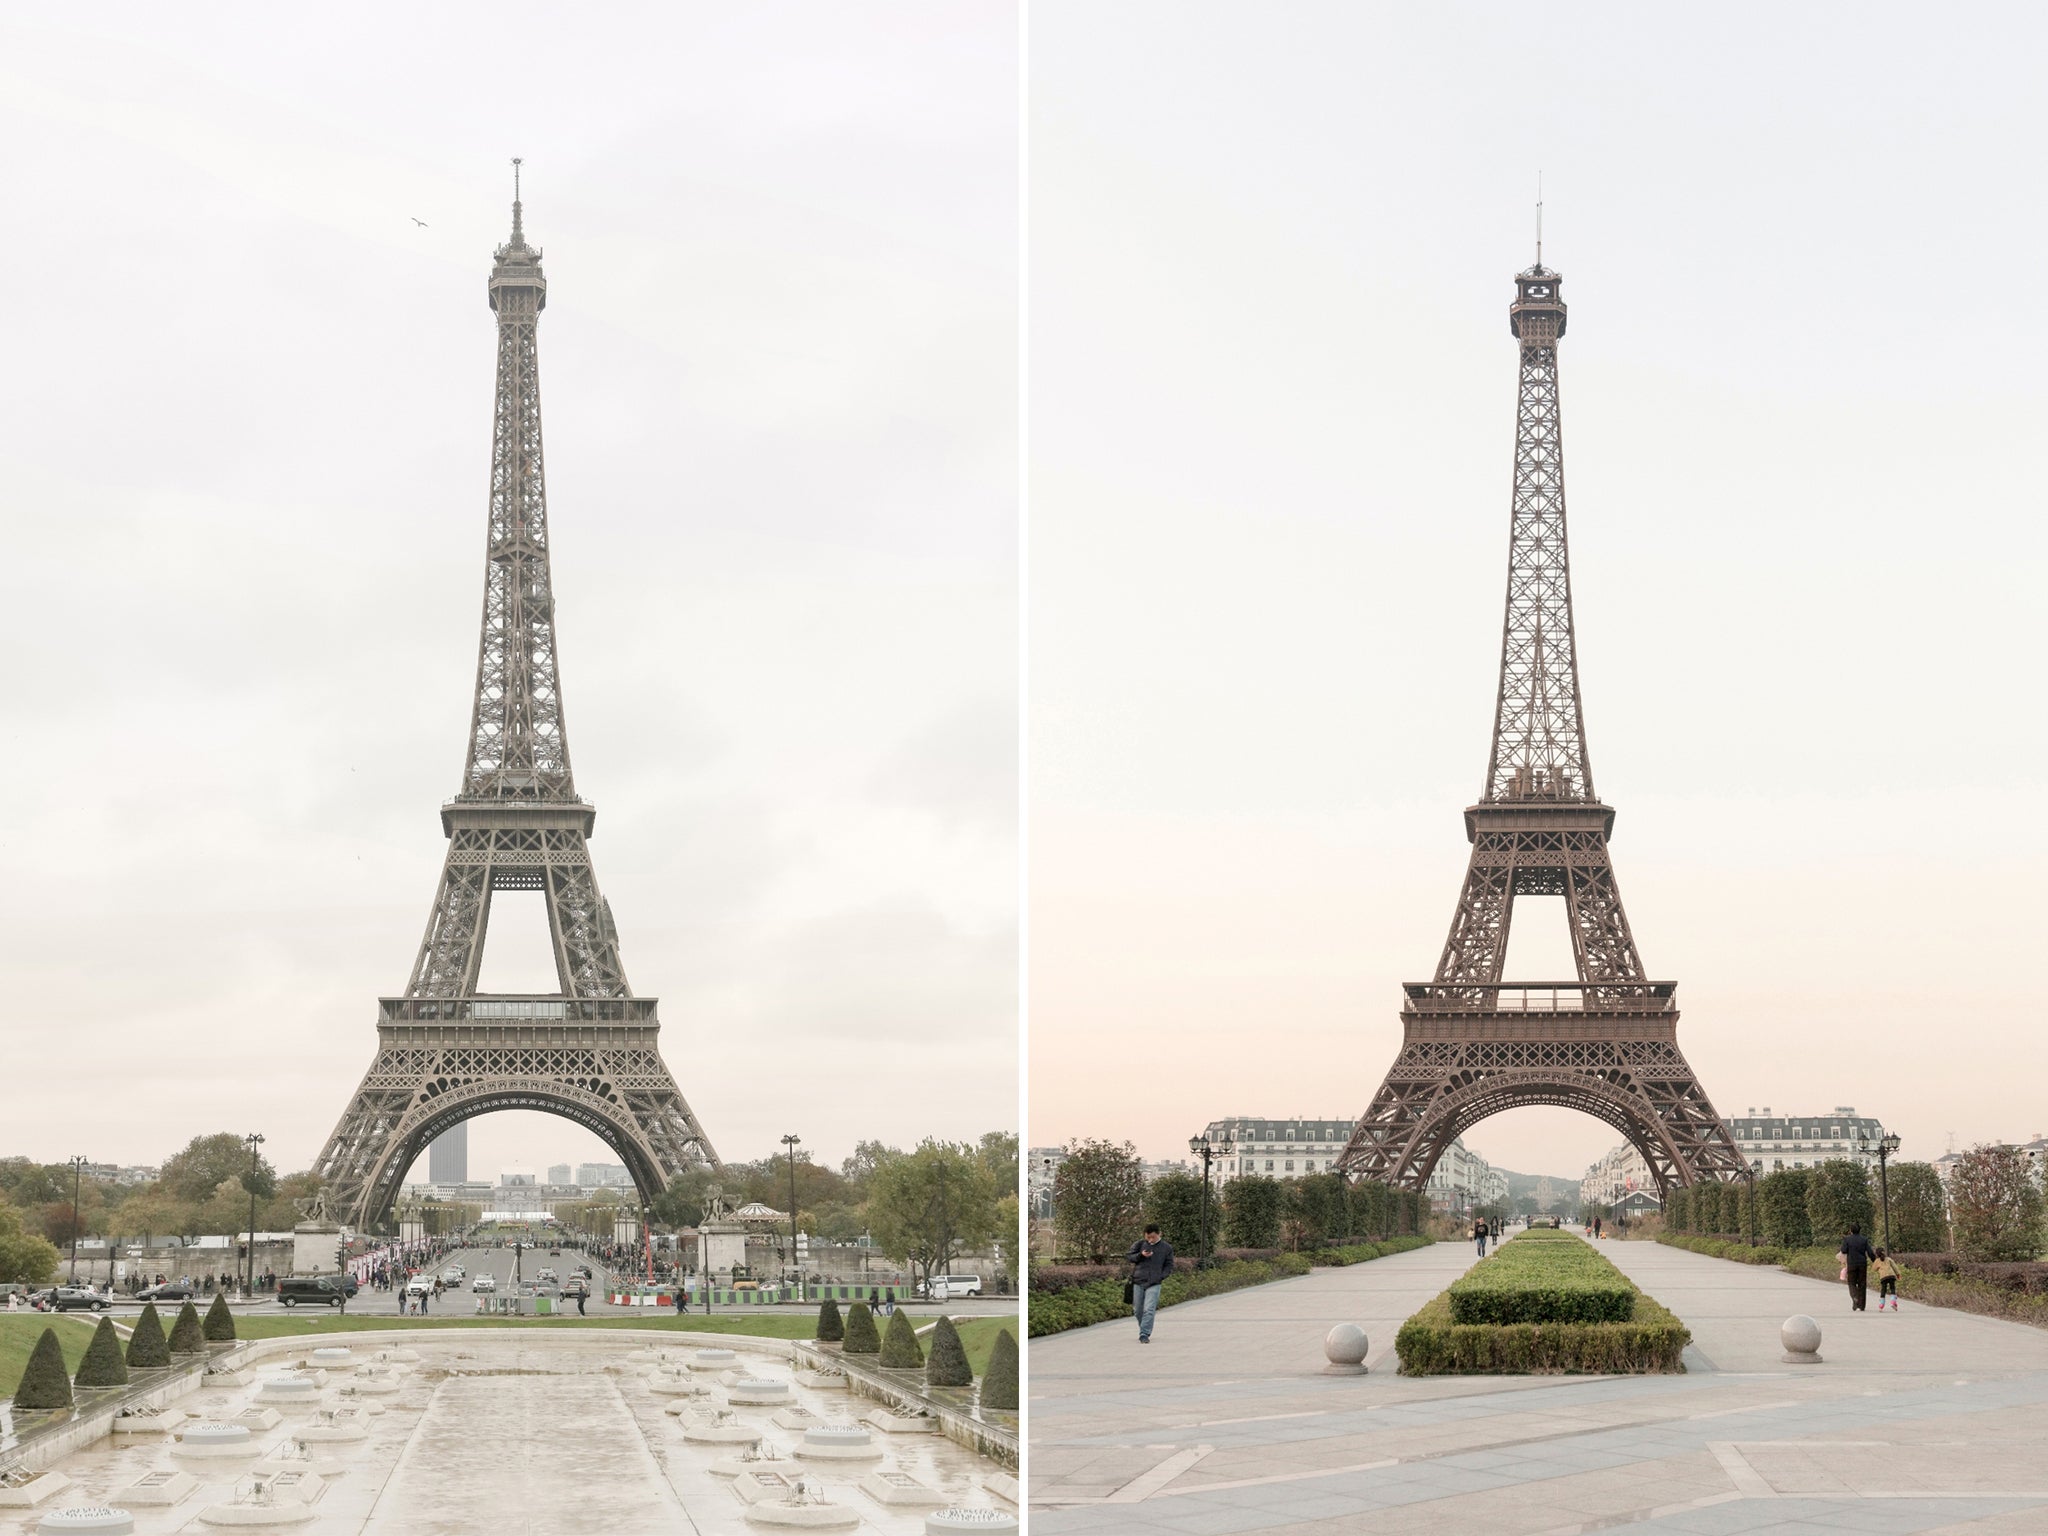 Left: The Eiffel Tower in Paris, France. Right: Replica tower in Tianducheng, China